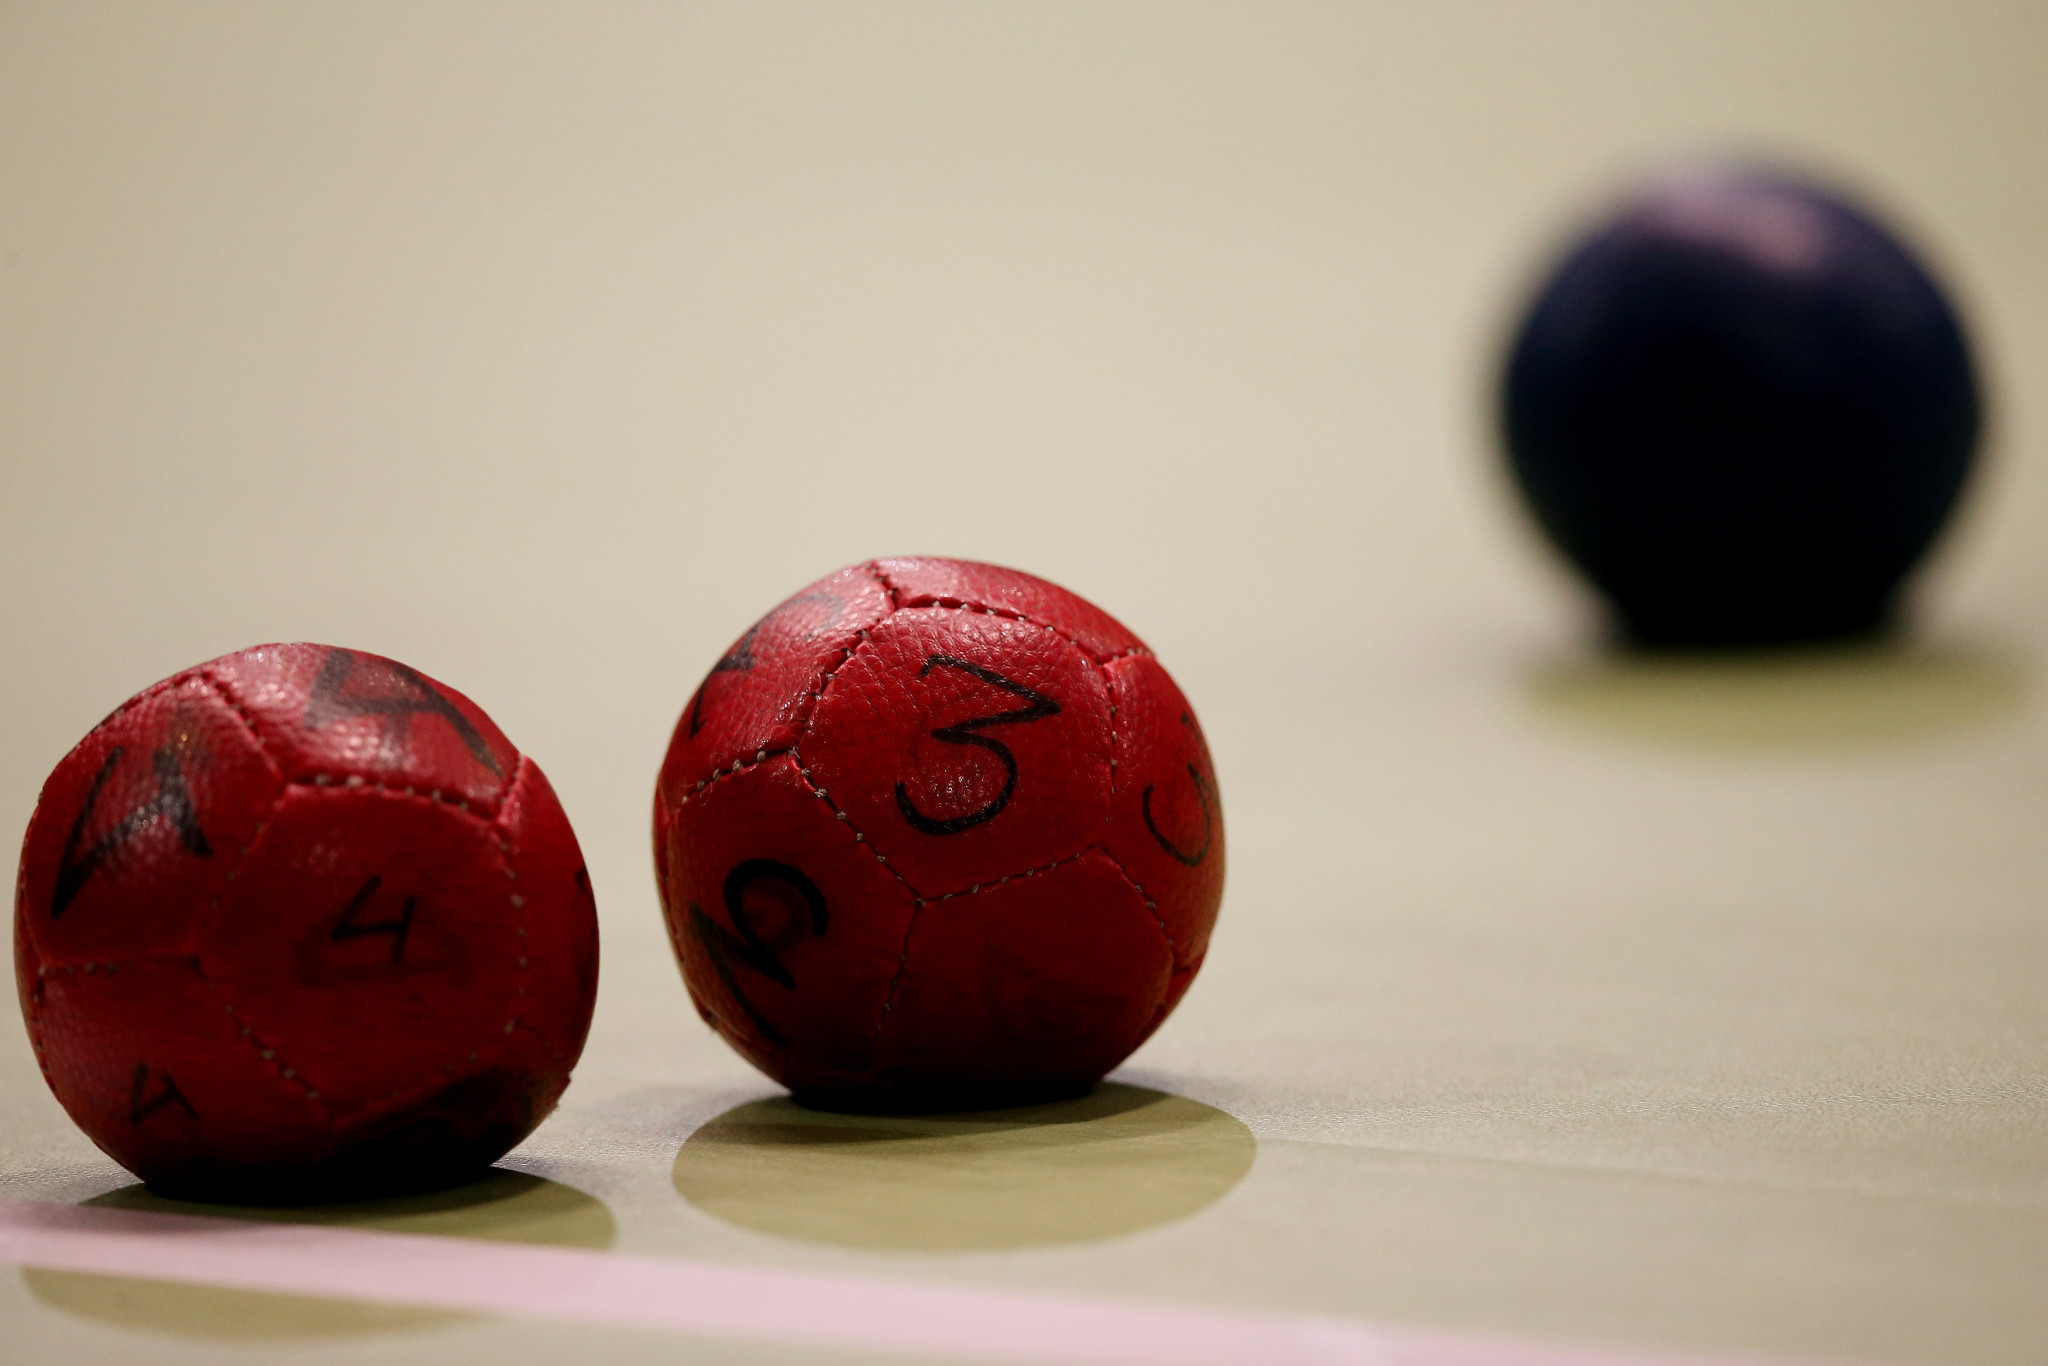 BISFed will soon have licensed boccia balls to ensure quality in the sport ©BISFed